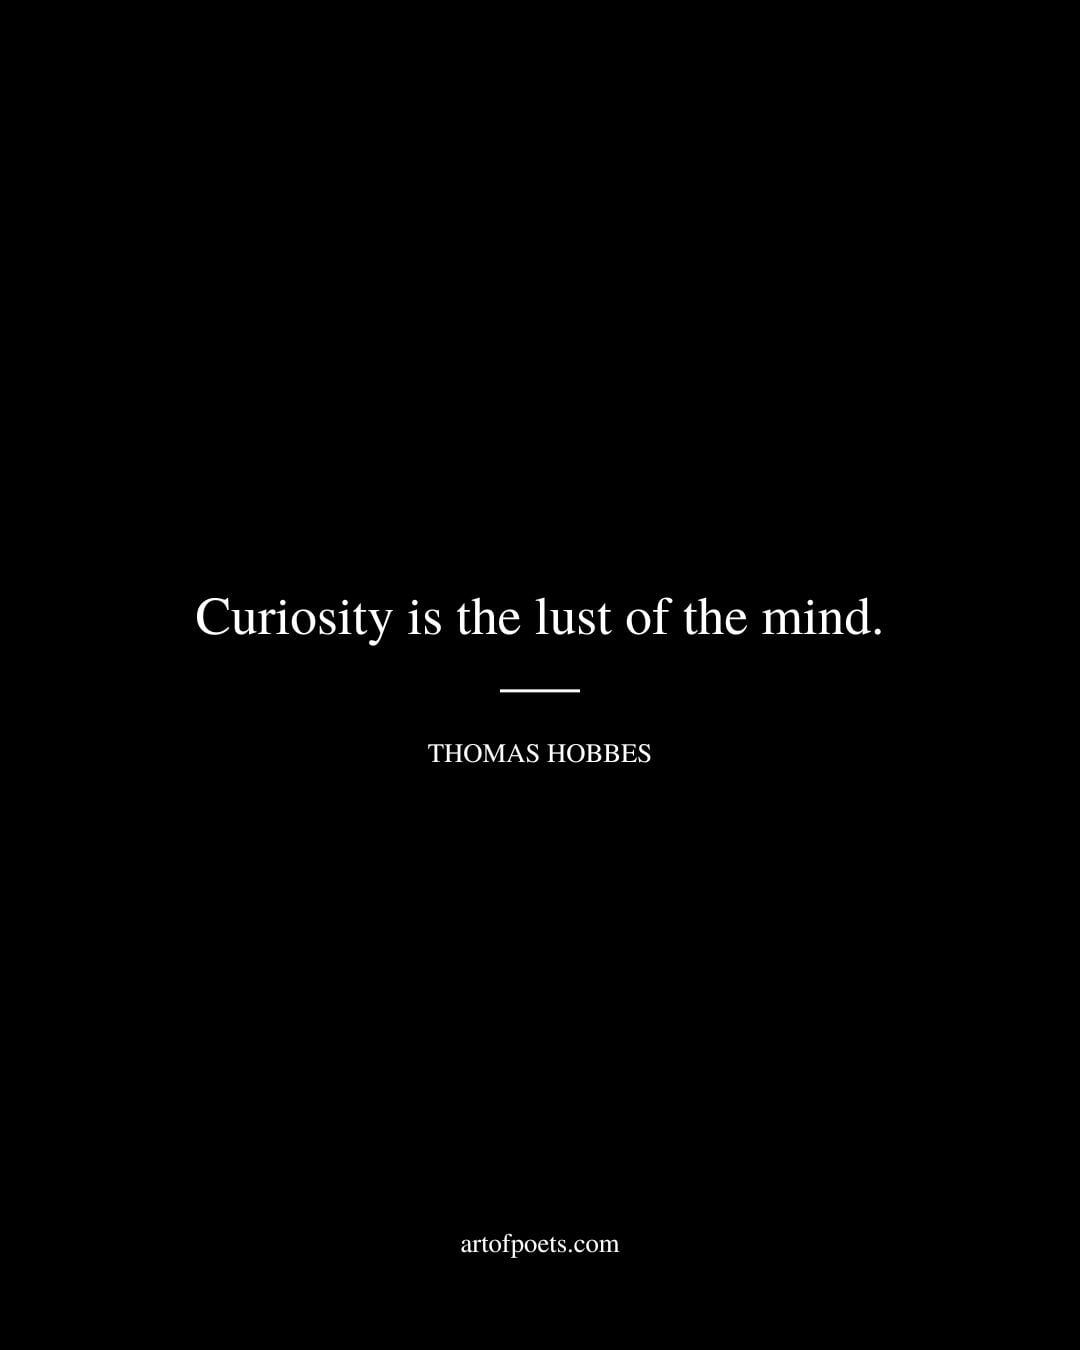 Curiosity is the lust of the mind